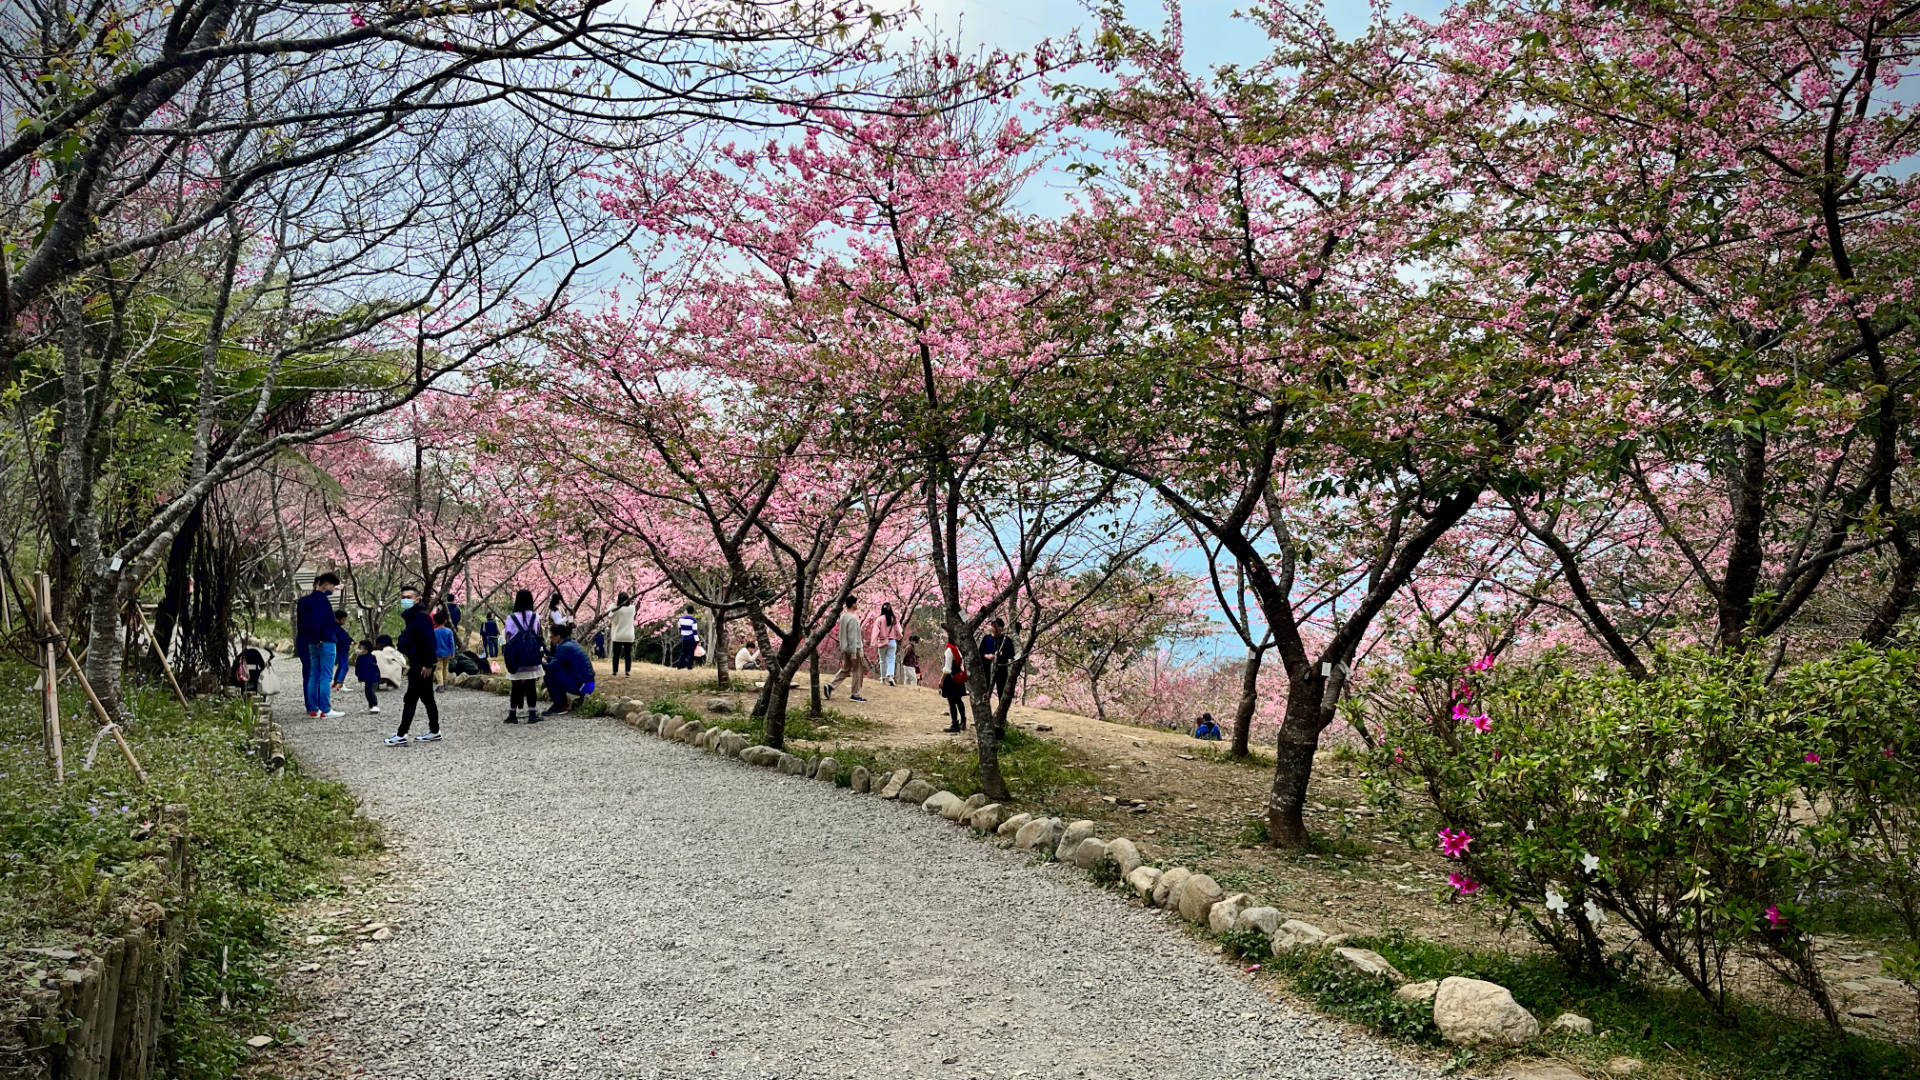 A gravel path leading to a field of blossoming trees, on the side of a hill. Many people are gathered around the trees.